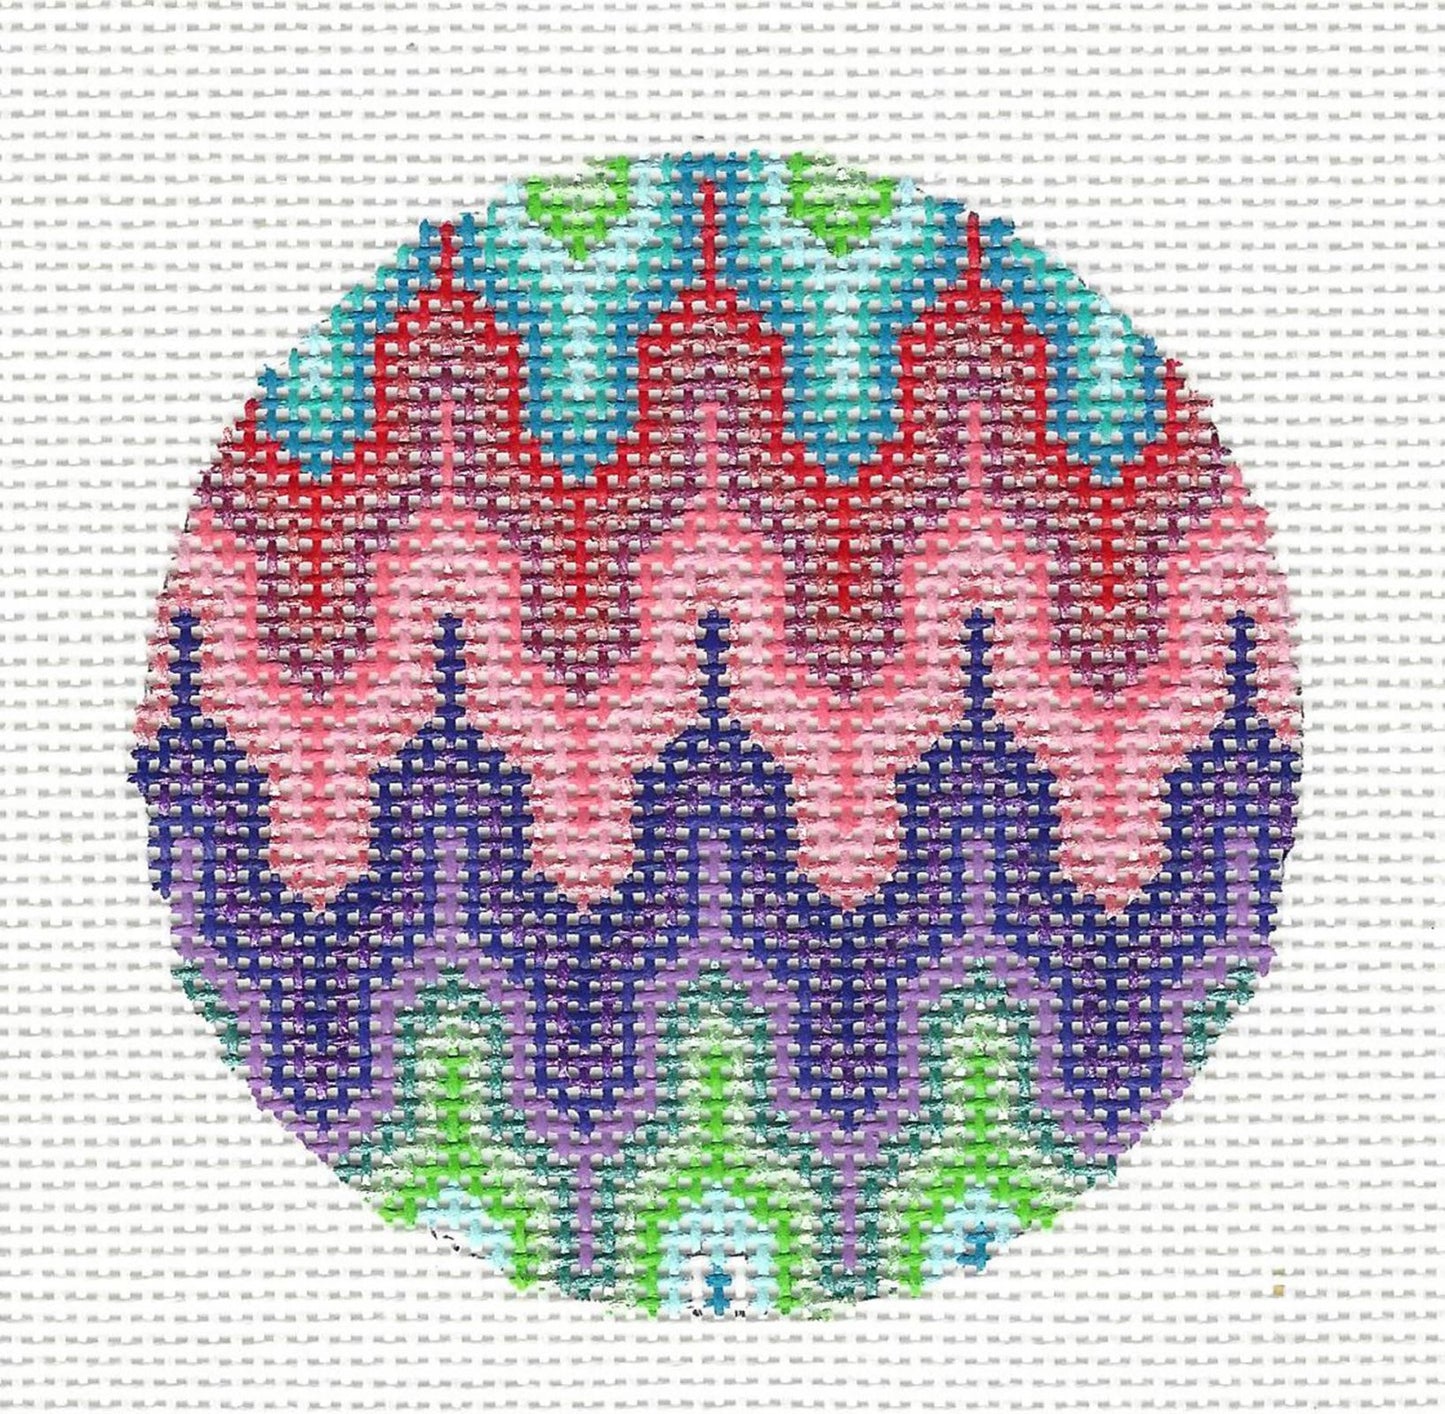 Round ~ Flame Bargello Jewel Tones Ornament handpainted Needlepoint Canvas by Tanya Mertel from Danji